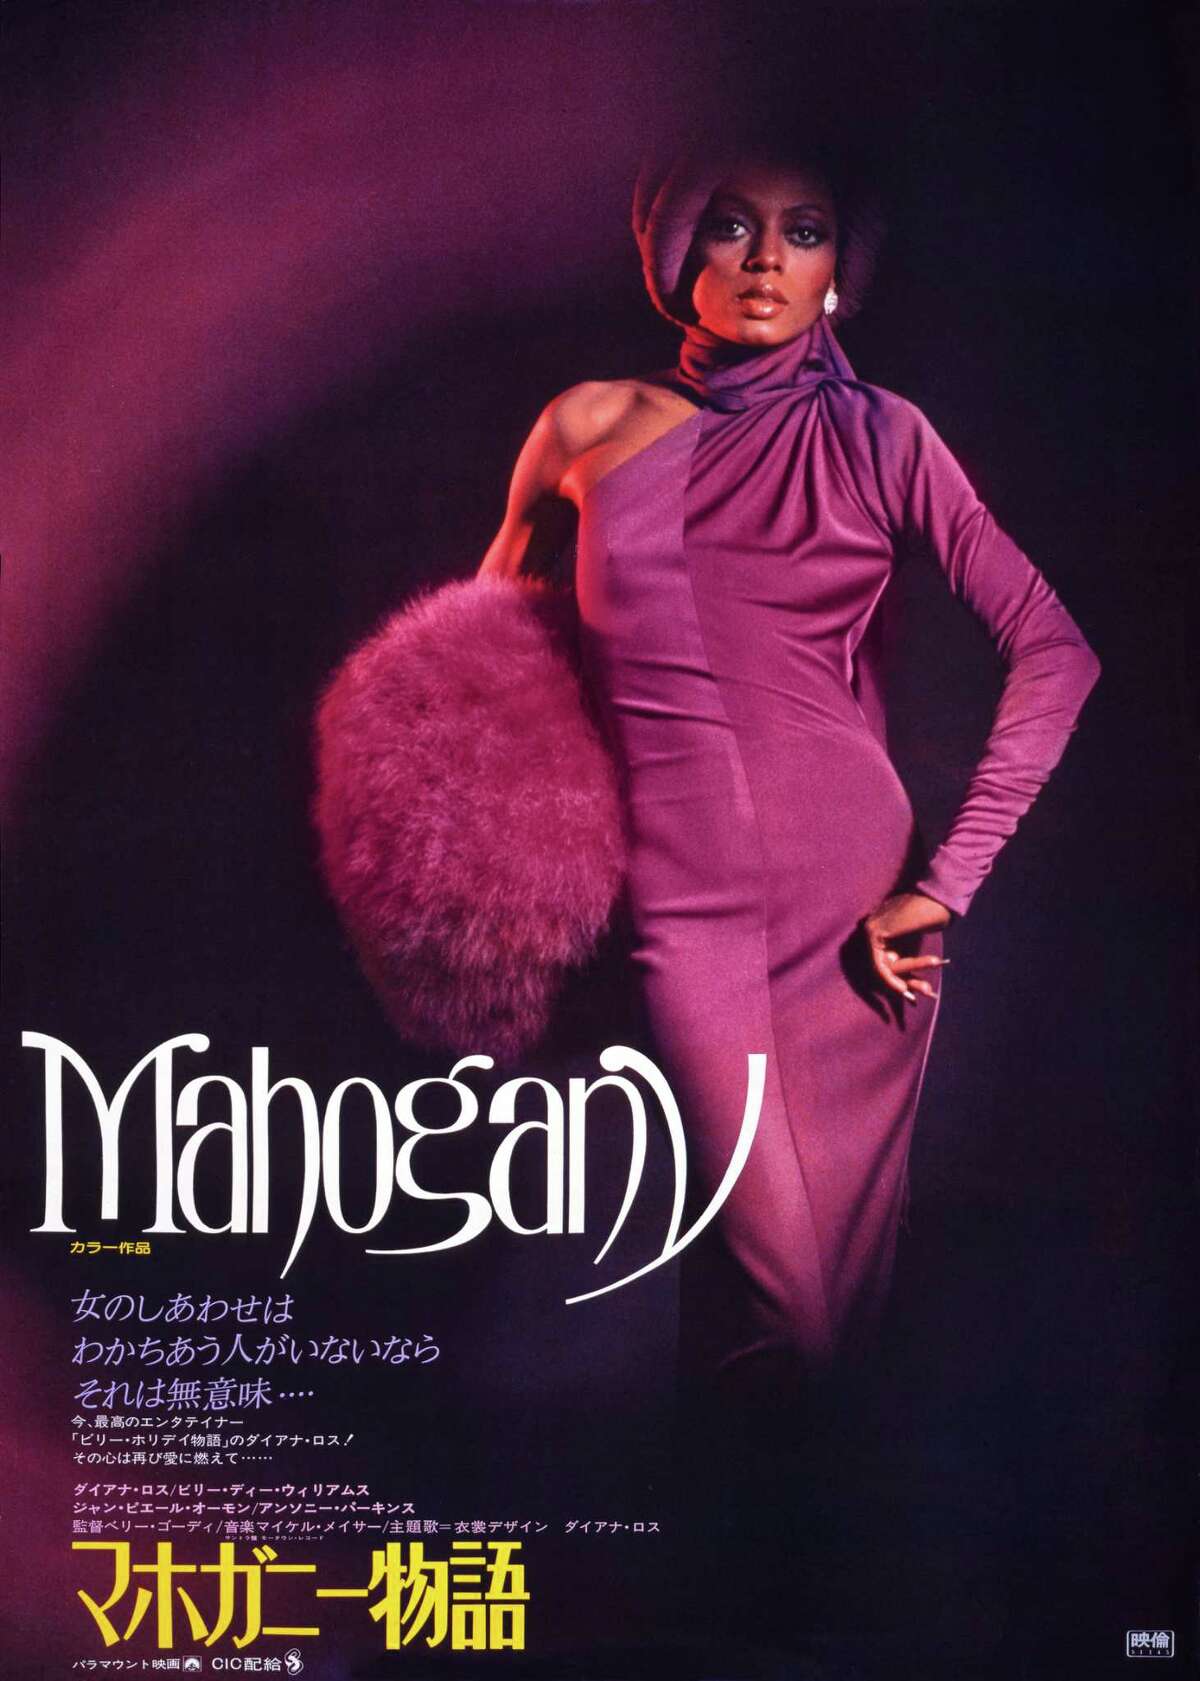 MAHOGANY: Diana Ross and Billy Dee Williams starred in the 1975 film, "Mahogany," about an aspiring fashion designer in Chicago (Ross) who rises to fame in Italy. Chronicle fashion editor Joy Sewing will host a screening of the movie on Dec. 2, 2017, at the Museum of Fine Arts Houston for the Movies Houstonians Love series.